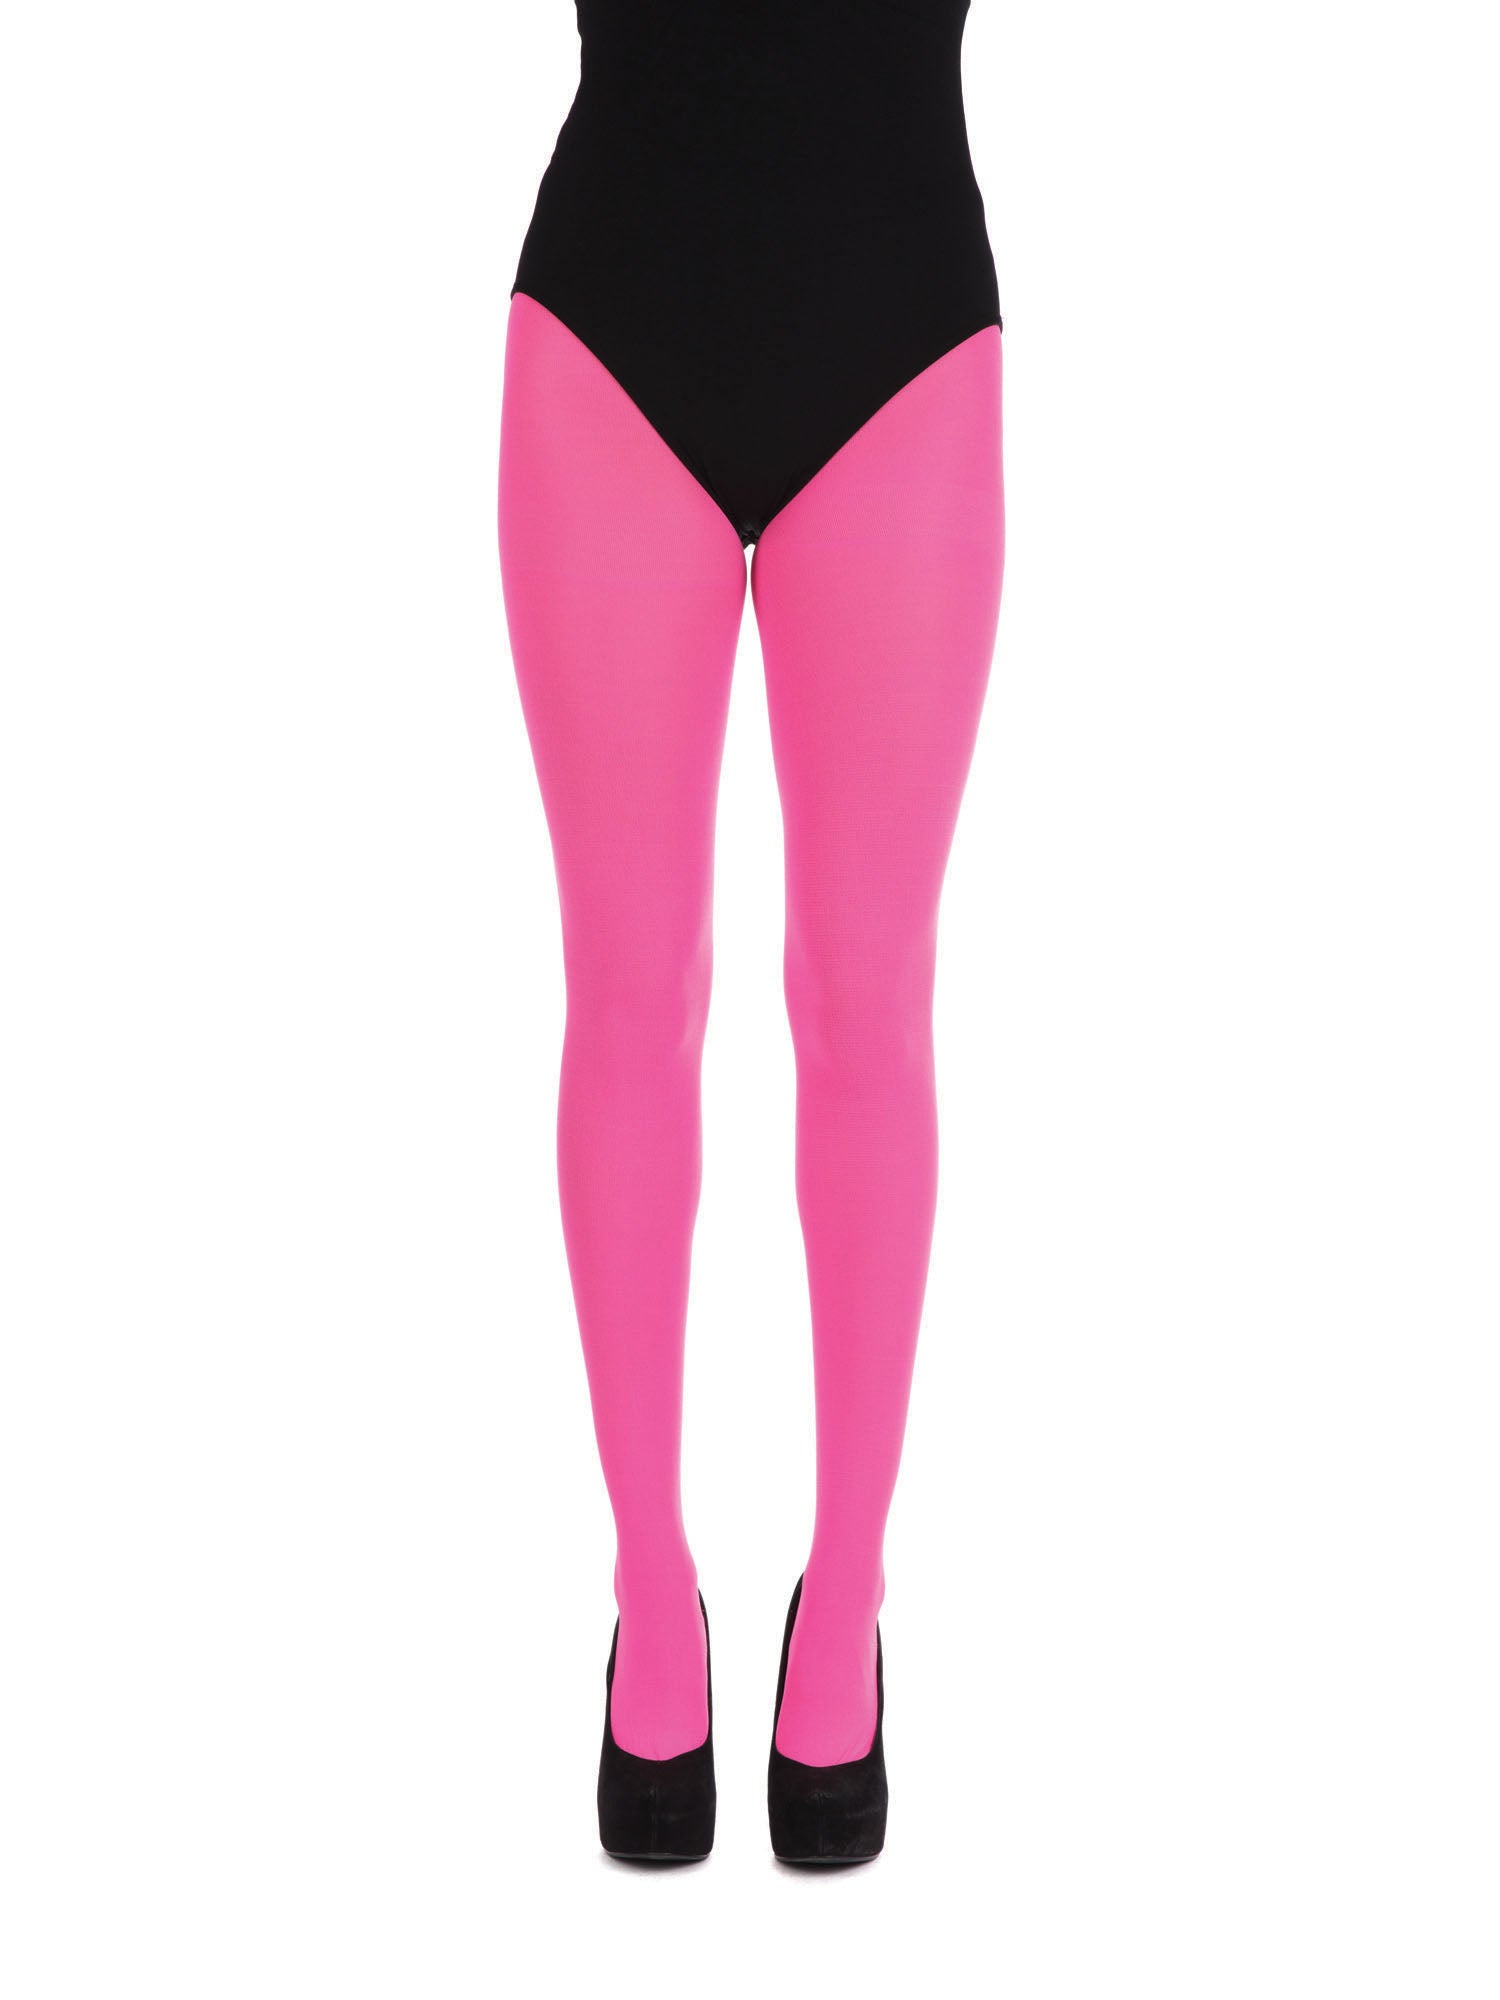 Tights, Pink, Generic, Accessories, One Size, Front